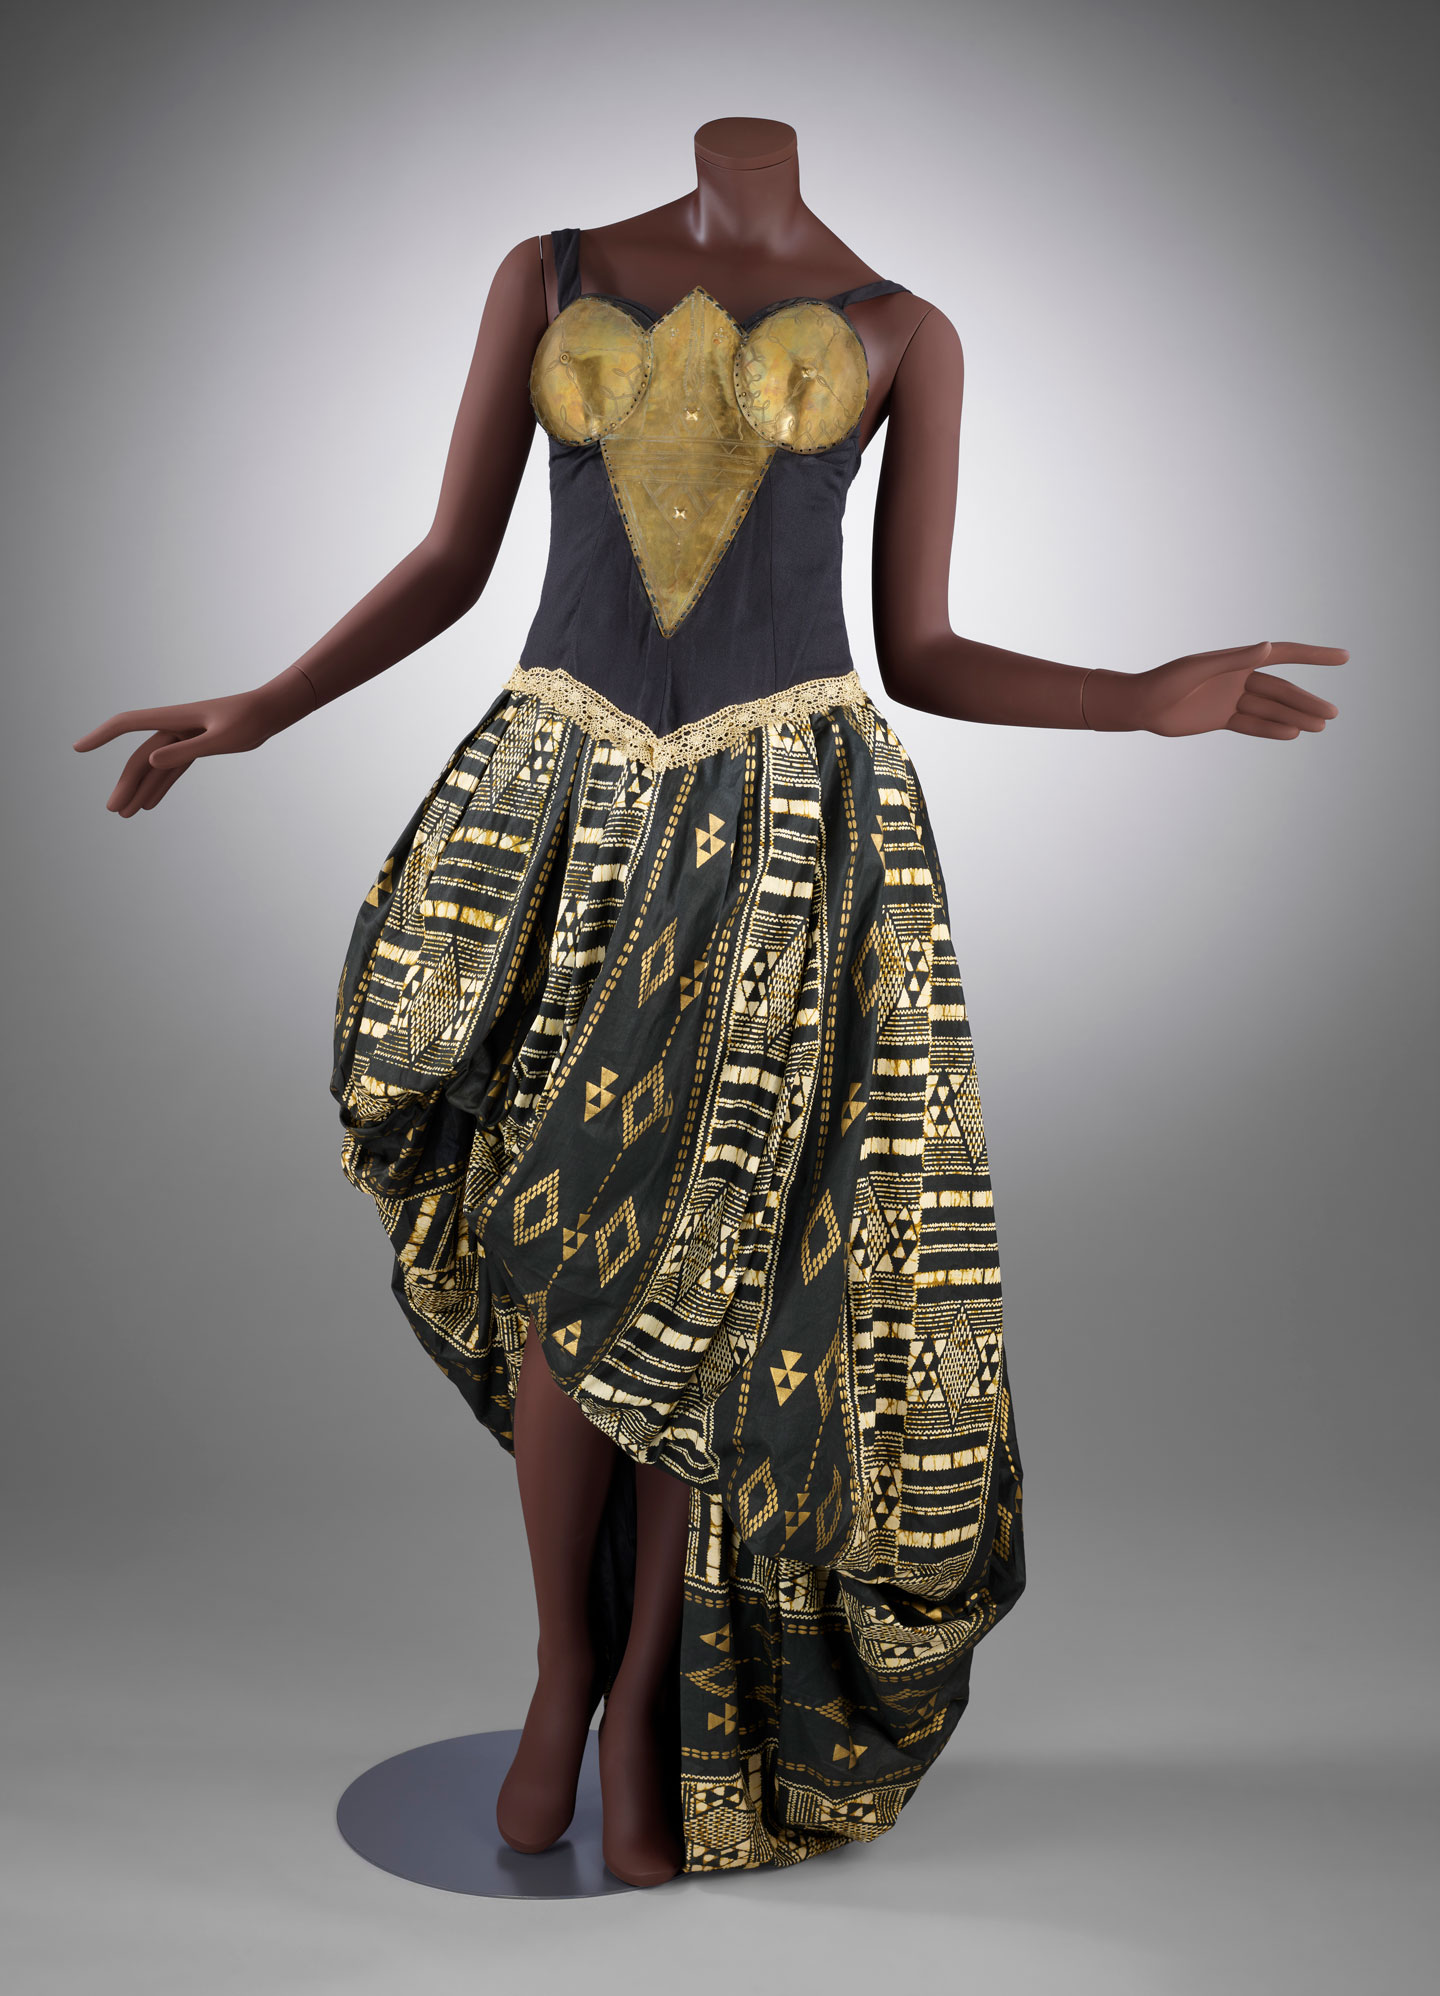 Africa Fashion exhibition at the Victoria and Albert Museum